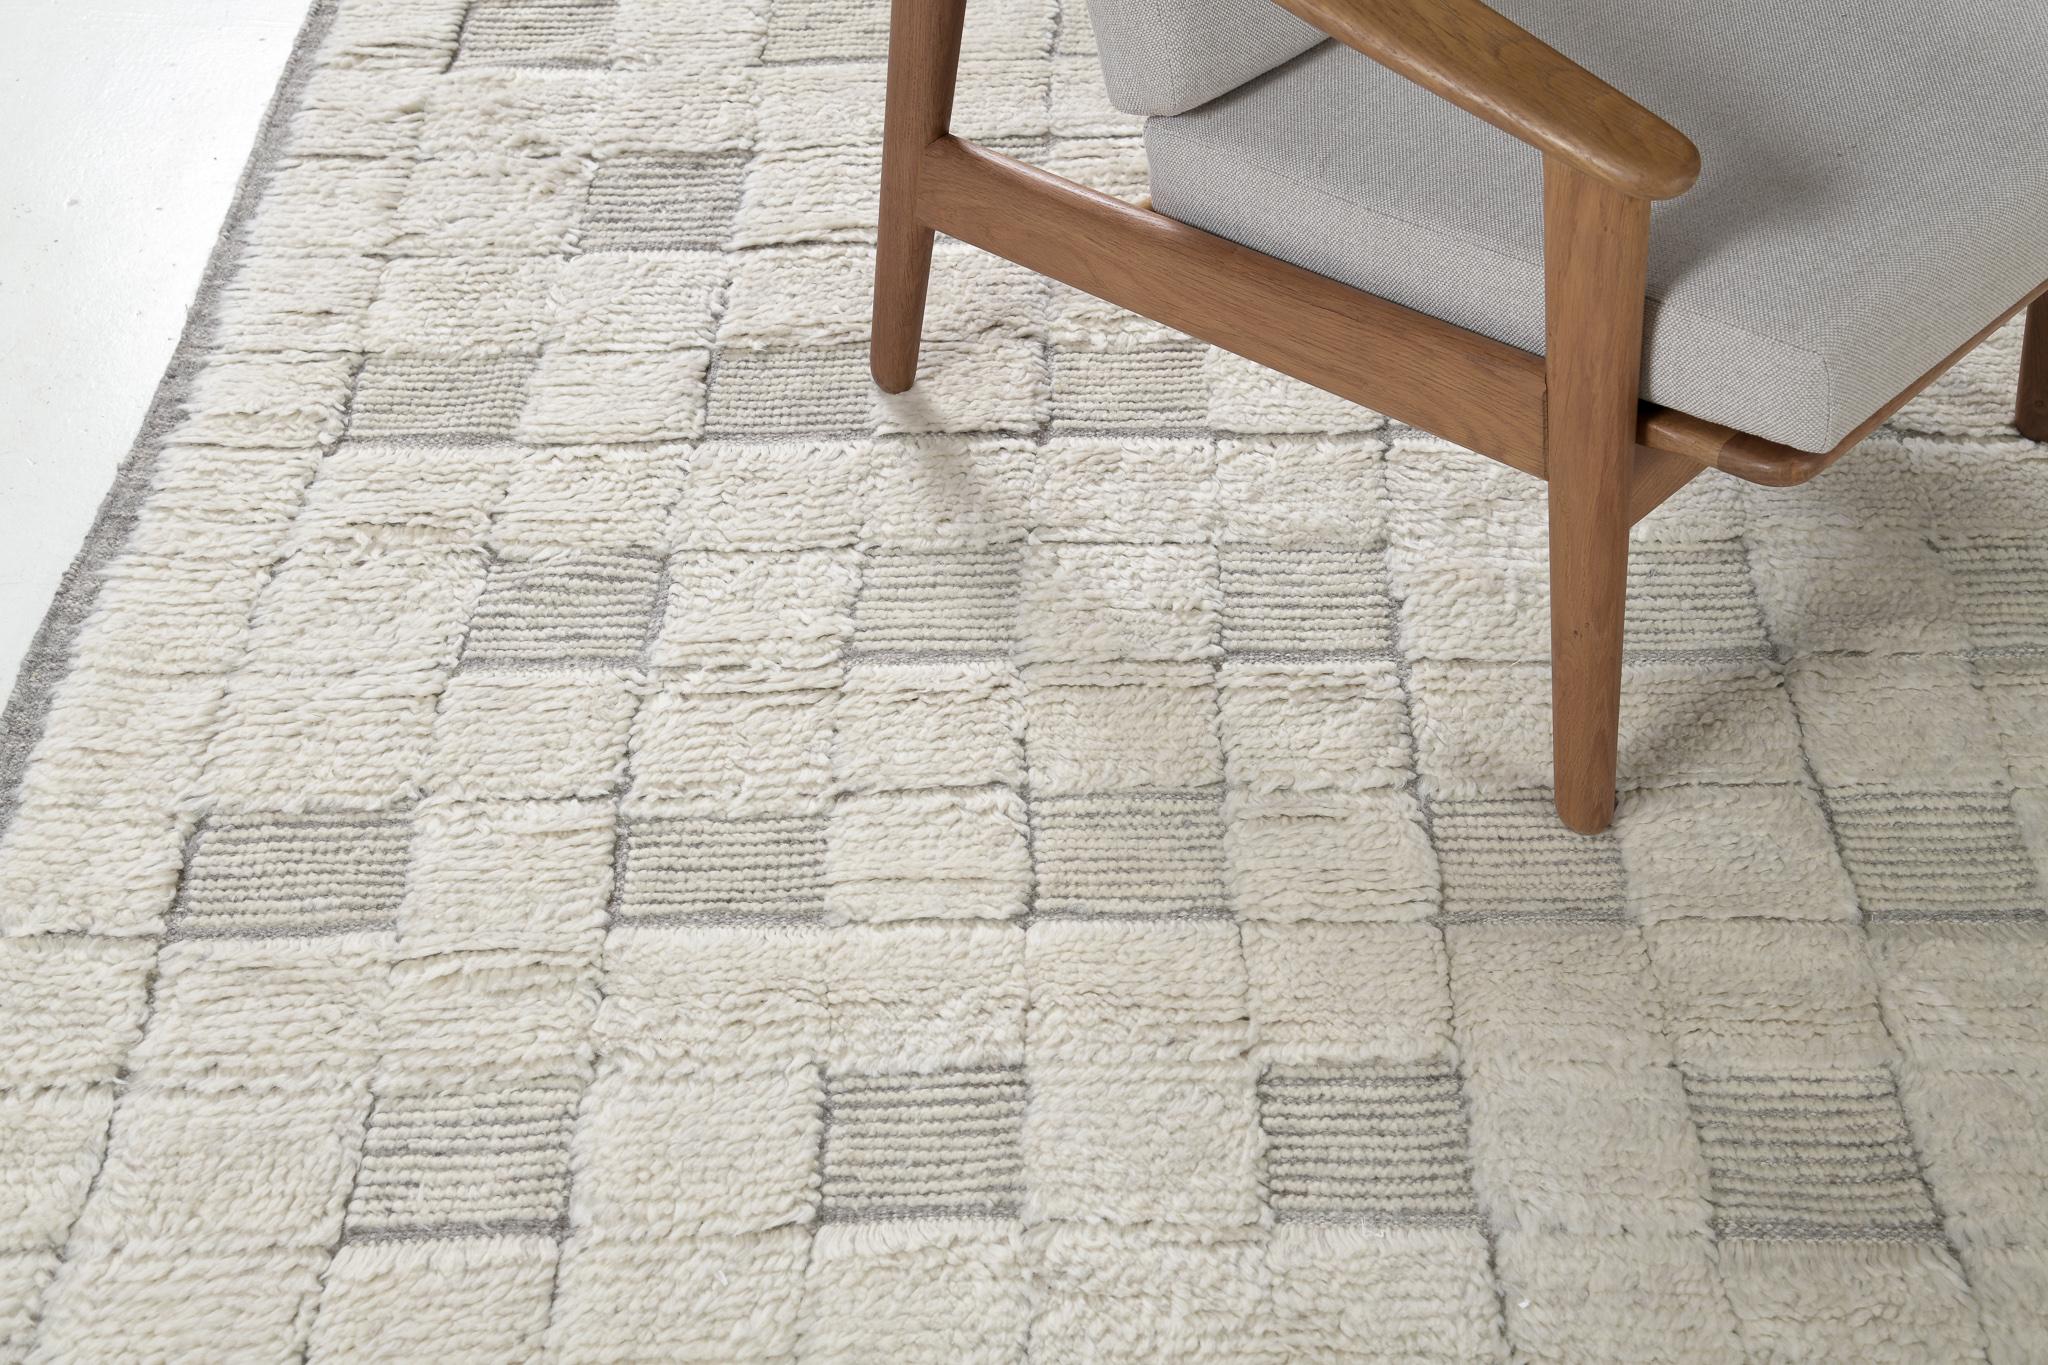 Heron is luxurious wool that features an embossed natural and contemporary design that gives your home a modern elegance. The soothing and calming plush pile of this masterpiece makes you satisfied in every stay. Sandpiper collection designed in Los